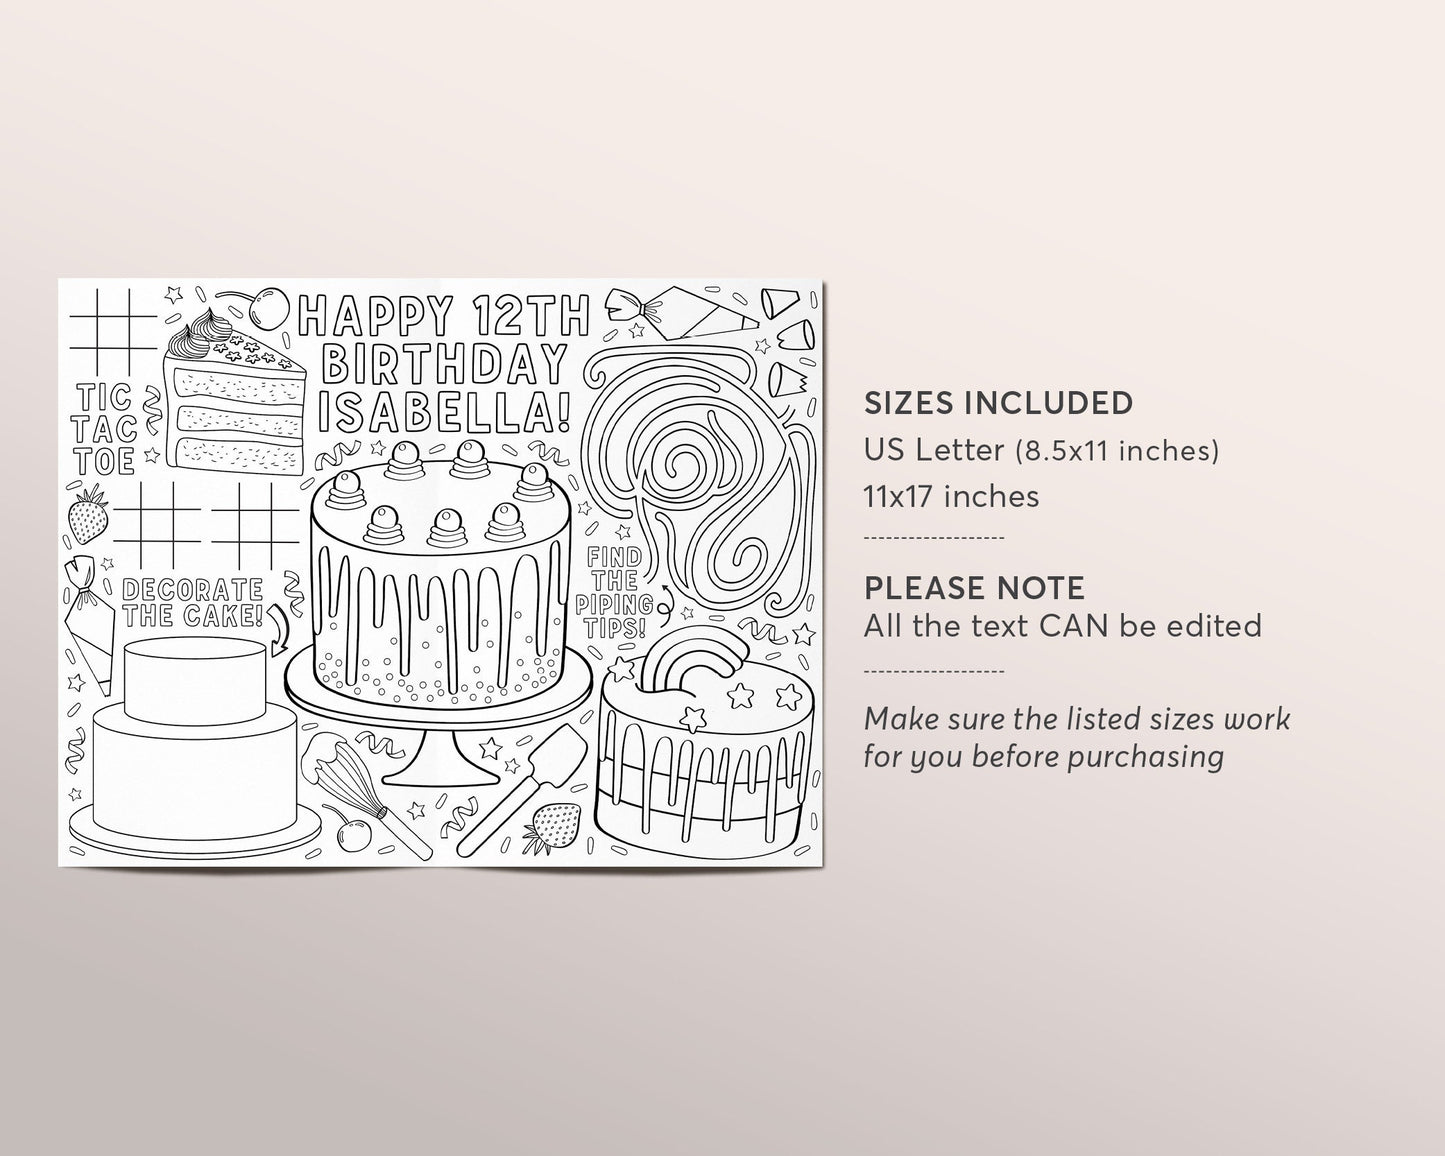 Cake Decorating Birthday Party Coloring Placemat For Kids Tween Teens Editable Template, Kids Cooking Girl Chef Coloring Page Craft Activity